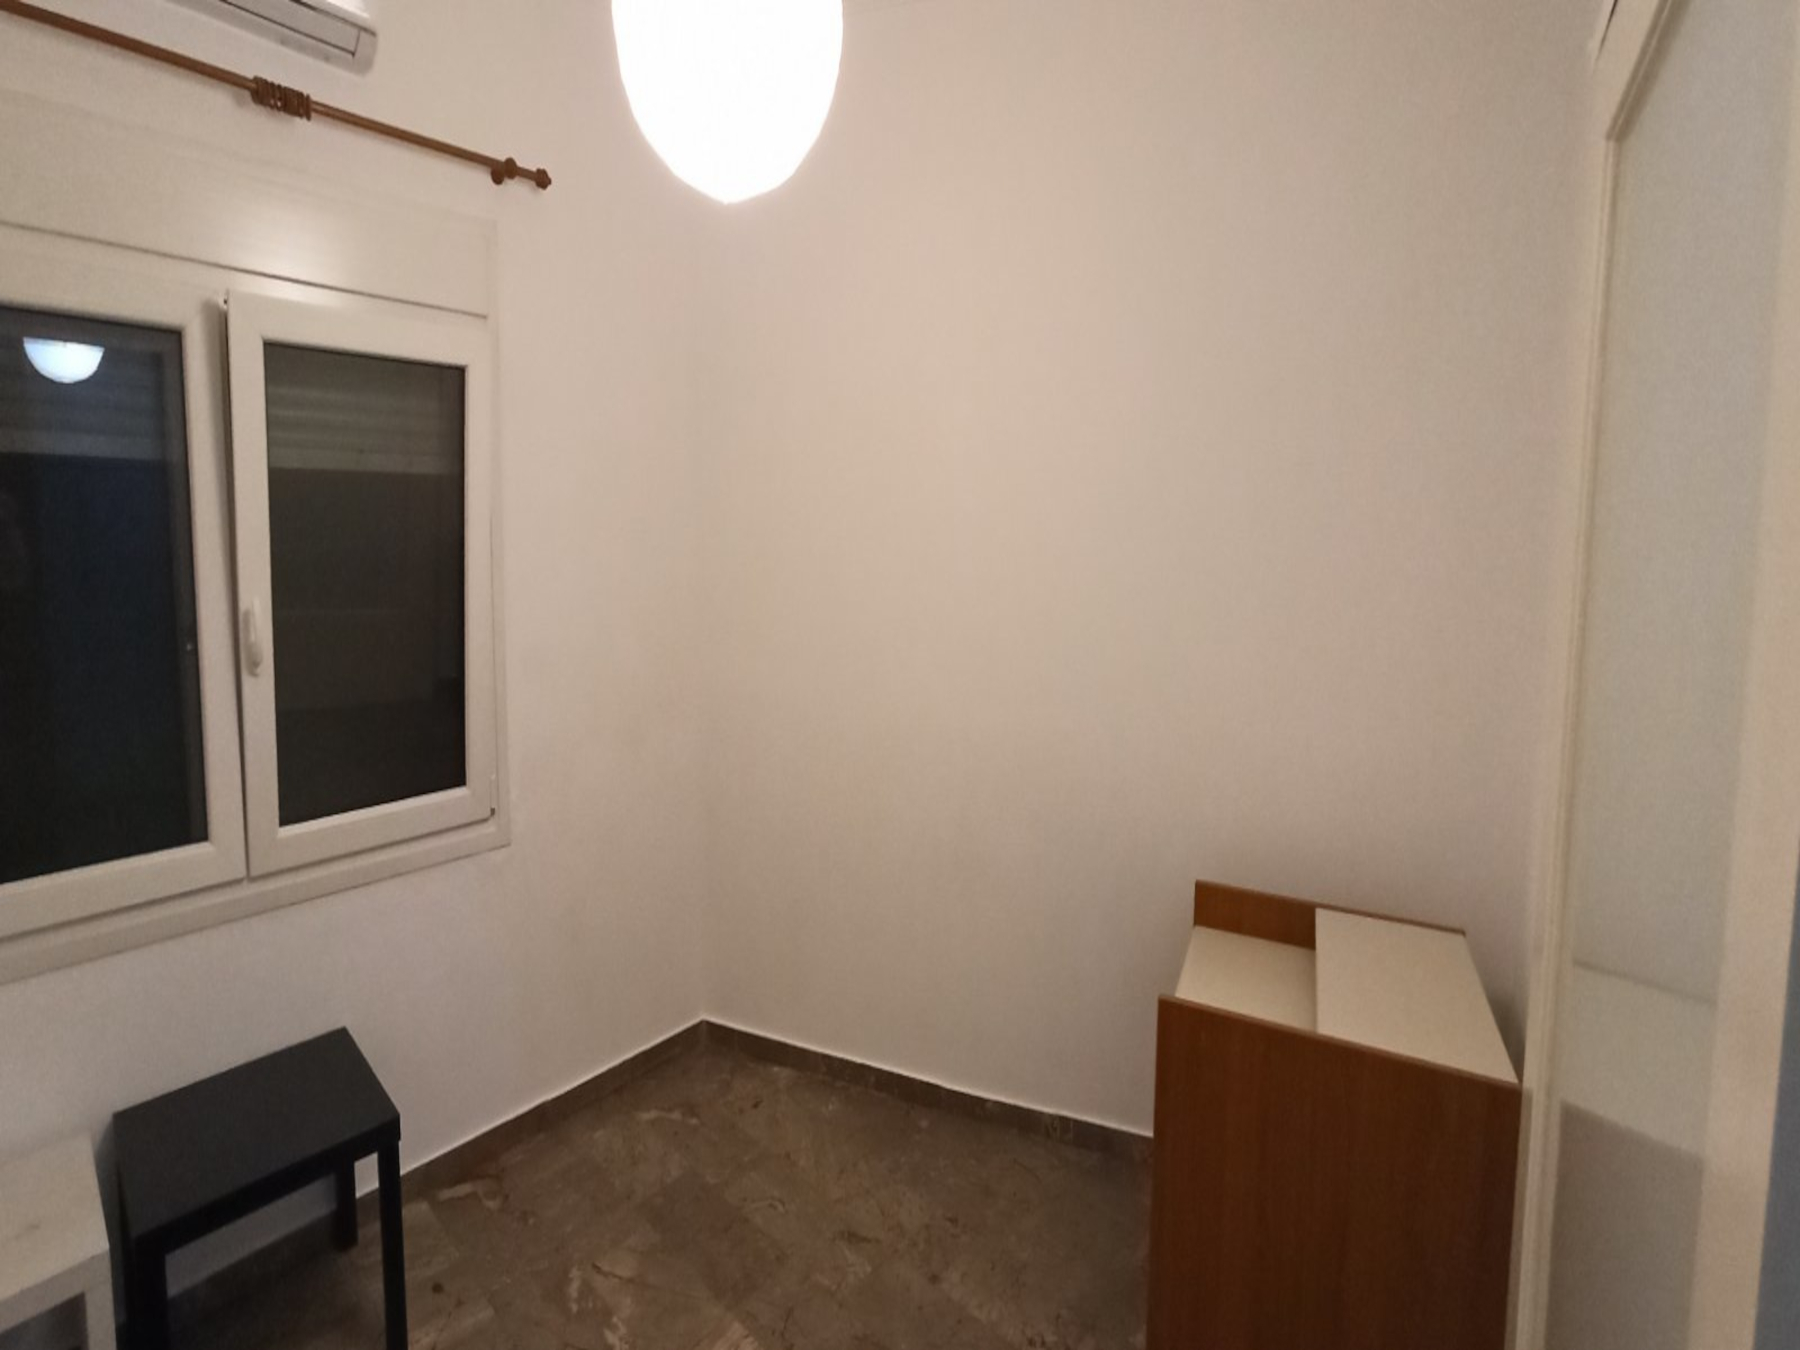 1 bedroom apartment for rent, 50 sq.m. 3rd floor in the center of Ioannina on Dodoni Avenue